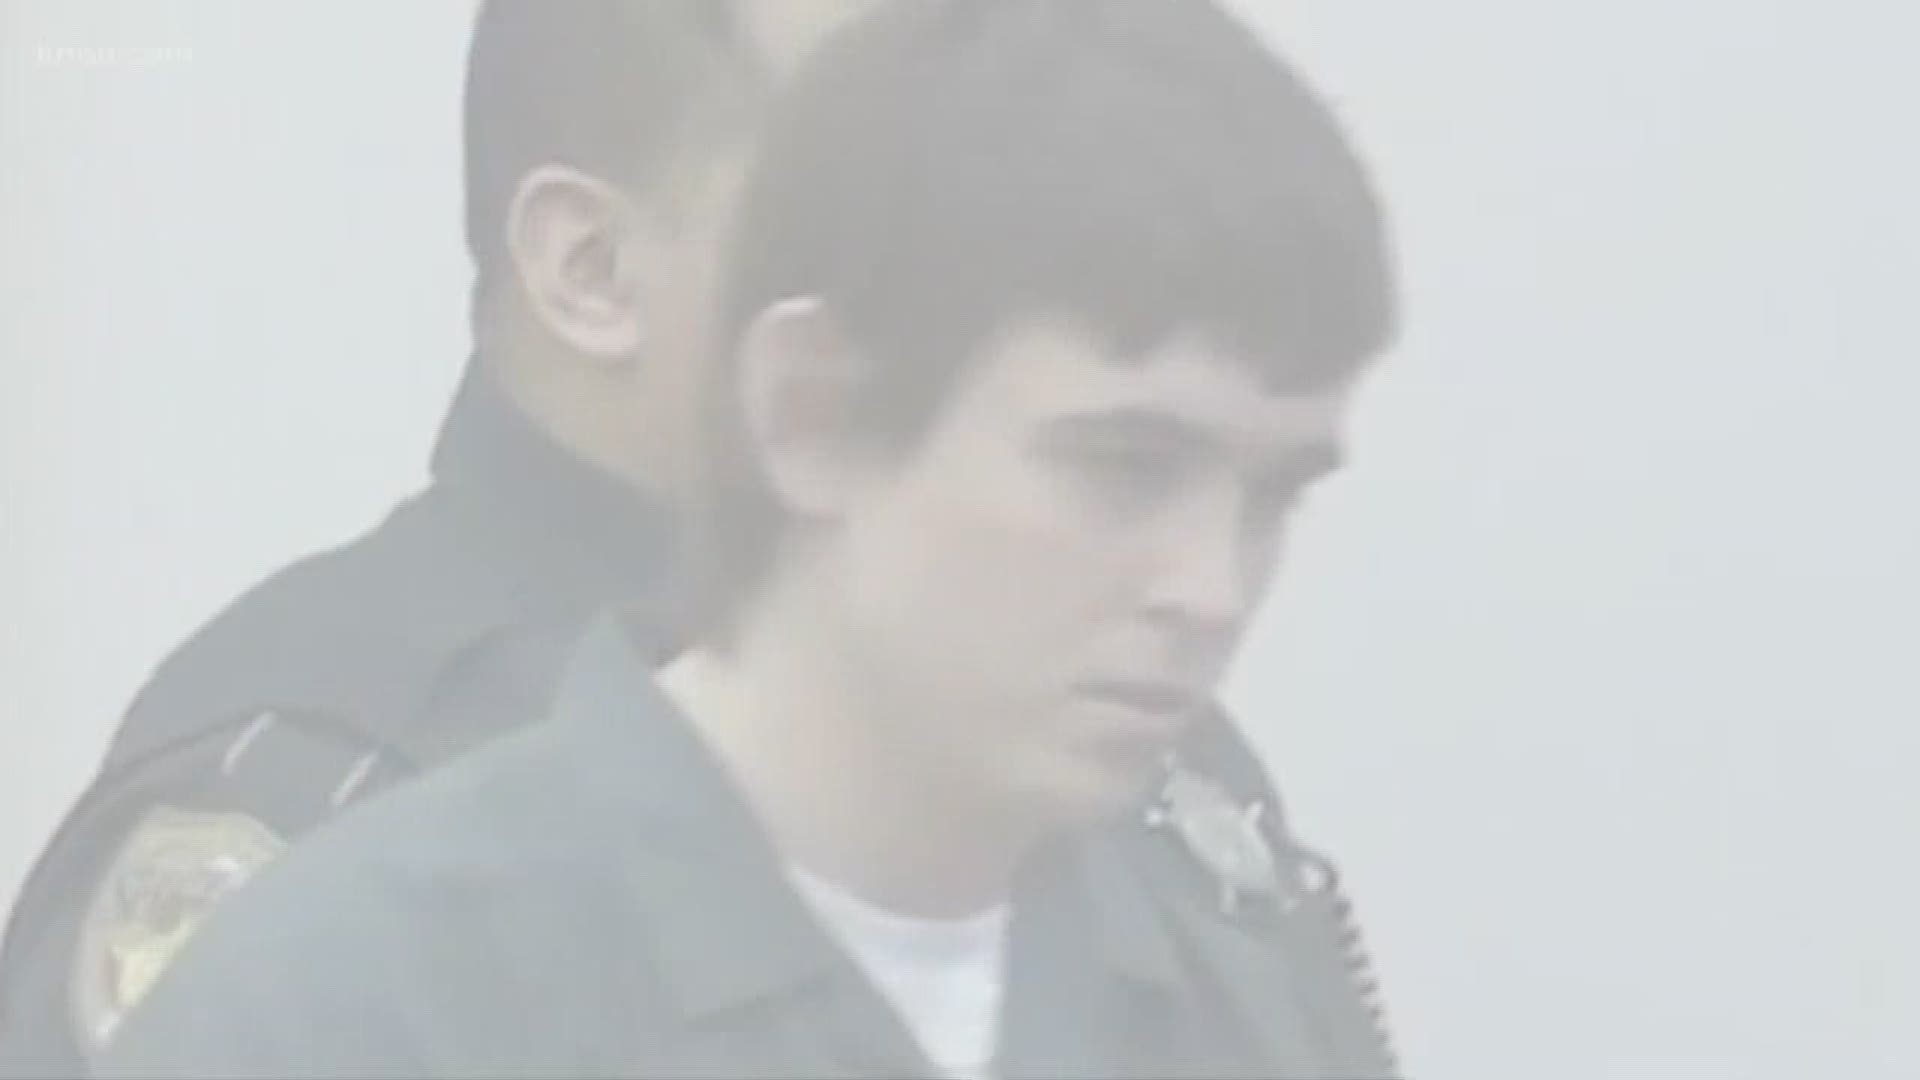 Victims of the accused Santa Fe High School shooter are hoping the case doesn't go to trial. A judge granted a change of venue request in the case Wednesday.